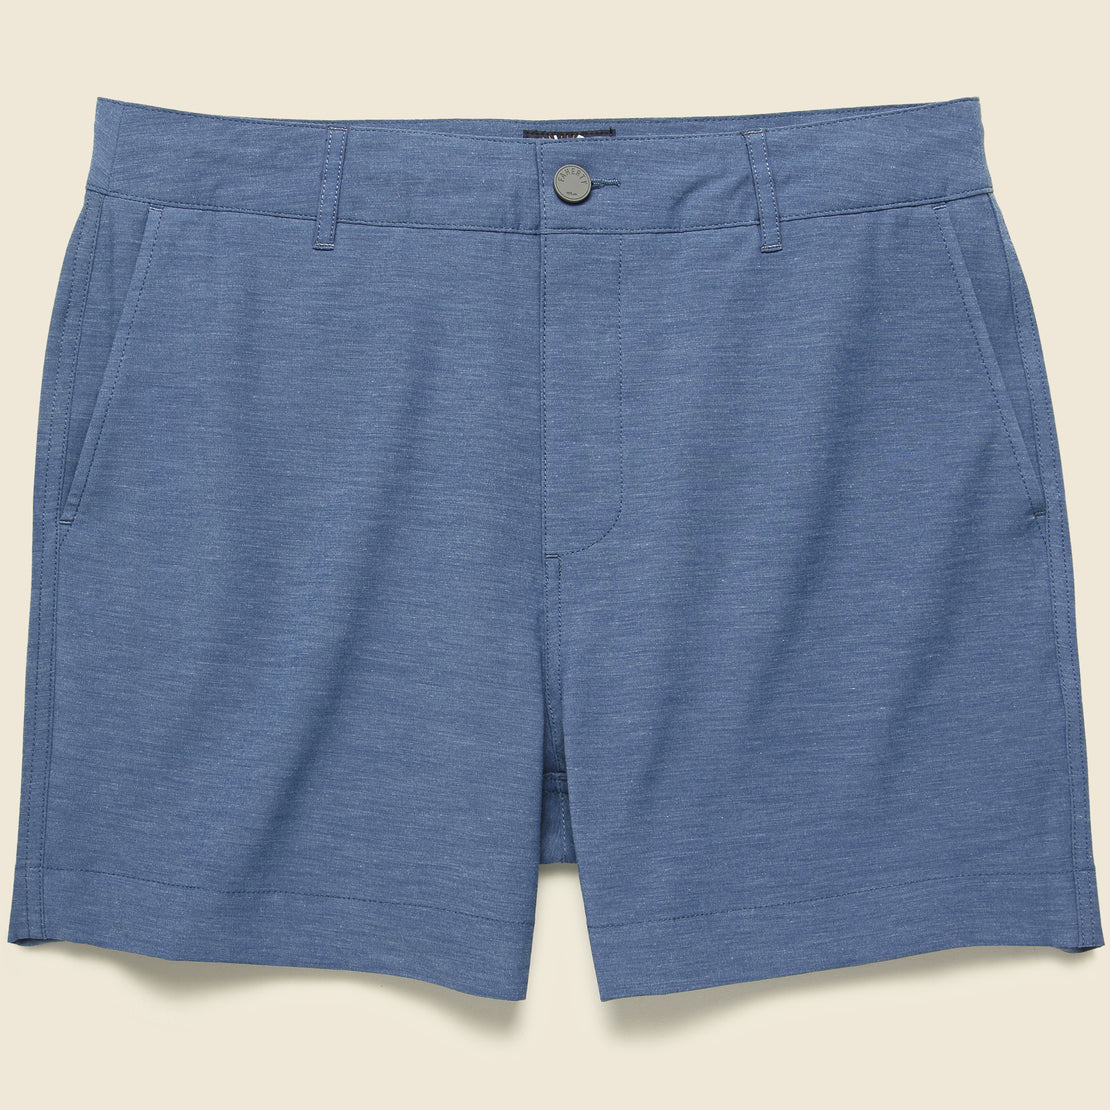 Faherty Belt Loop All Day Short 5-inch - Navy